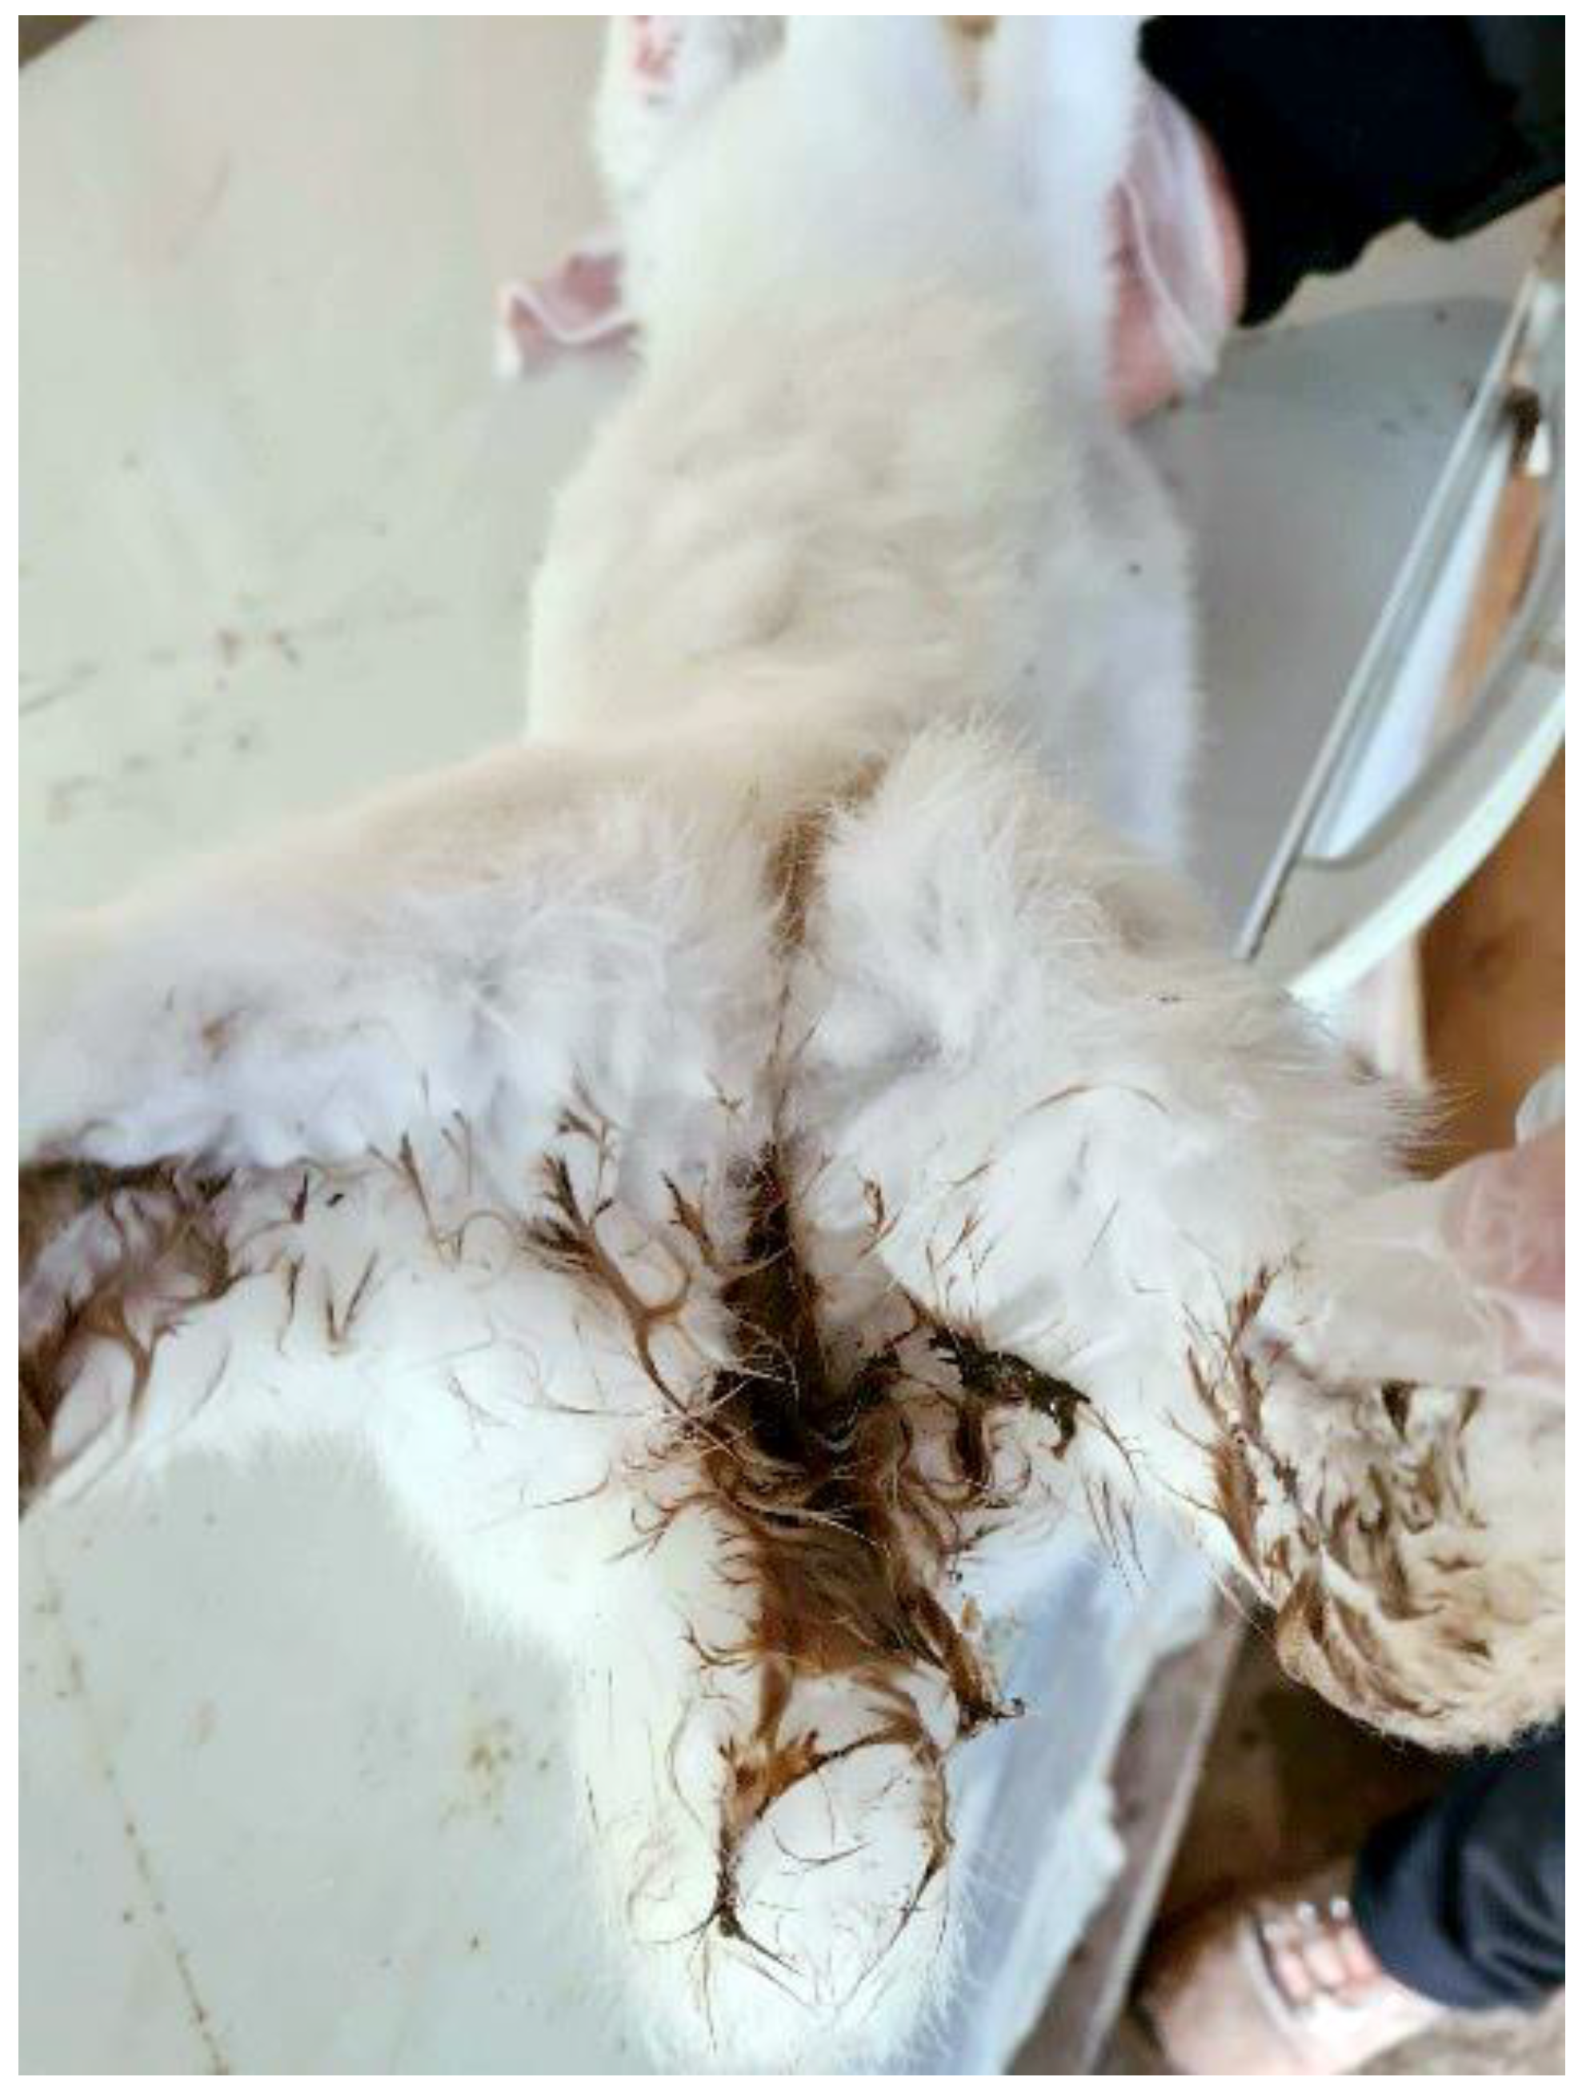 Pathogens | Free Full-Text | Deaths Due to Mixed Infections with Passalurus Eimeria spp. and Cyniclomyces guttulatus in an Industrial Rabbit Farm in Greece